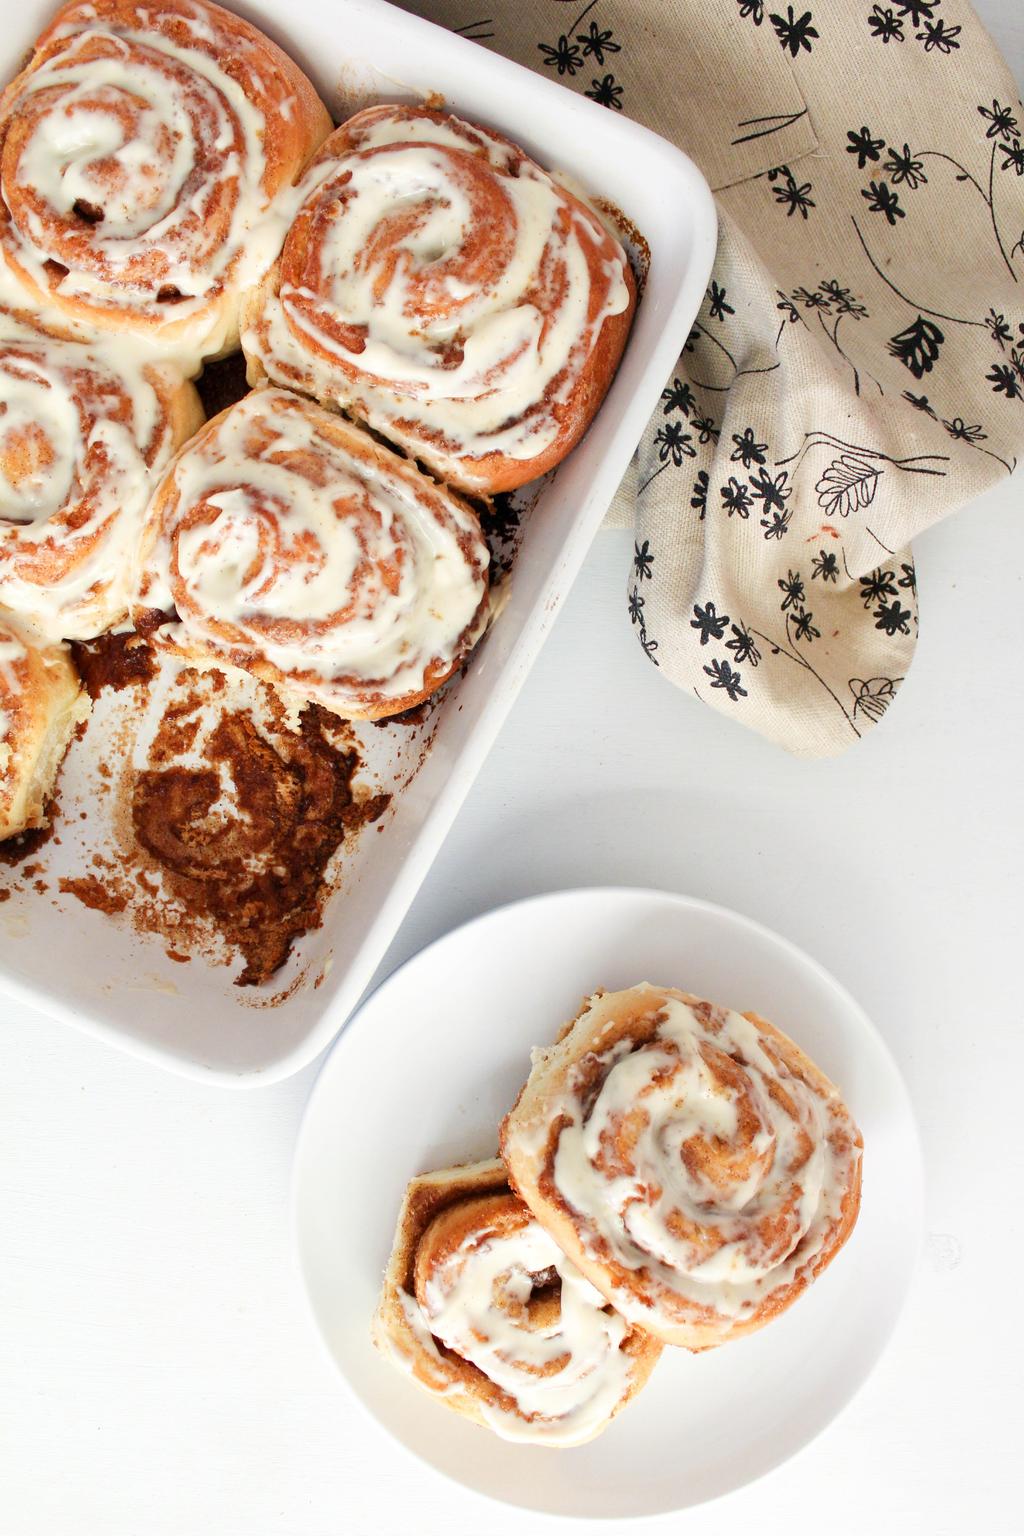 Cinnamon Rolls with a Maple Cream Cheese Frosting Author: Rachel s Eats Makes: appx 12 large rolls Ingredients: Dough: 1/2 cup warm water 1 tsp sugar 1 packet dry yeast packet 1/2 cup warm milk 1/2